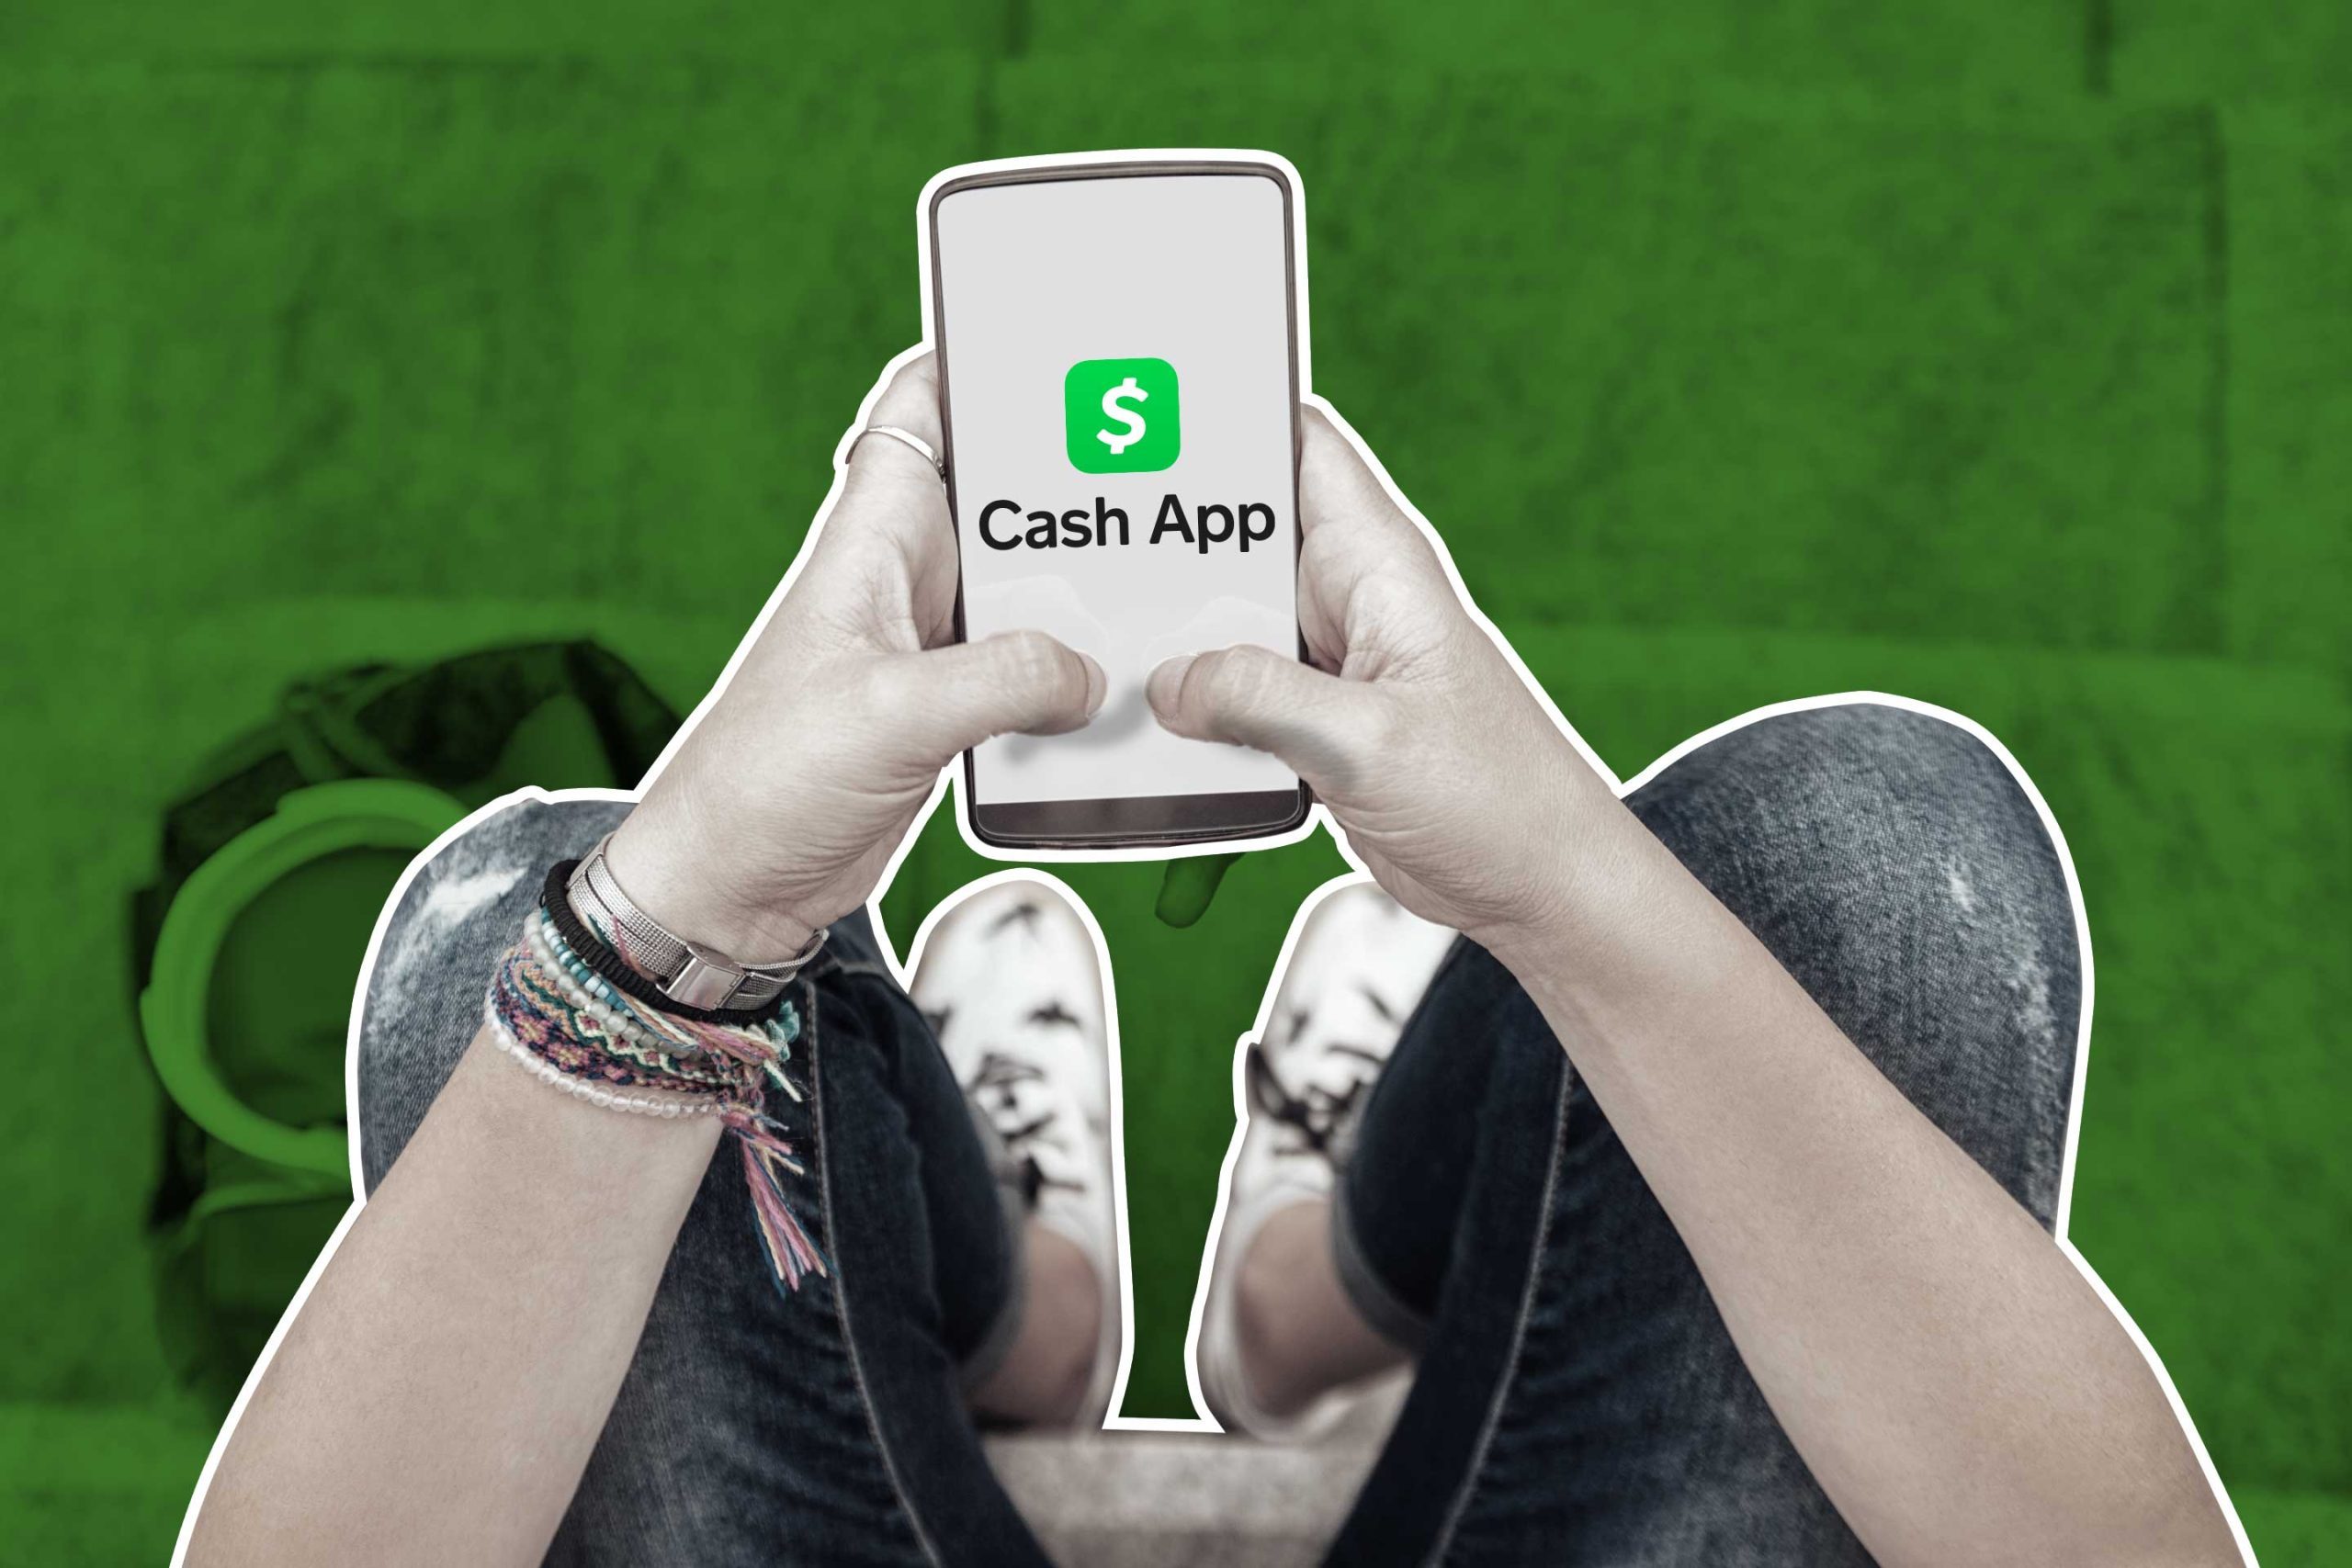 news-cash-app-now-available-to-kids-as-young-as-13-4777489